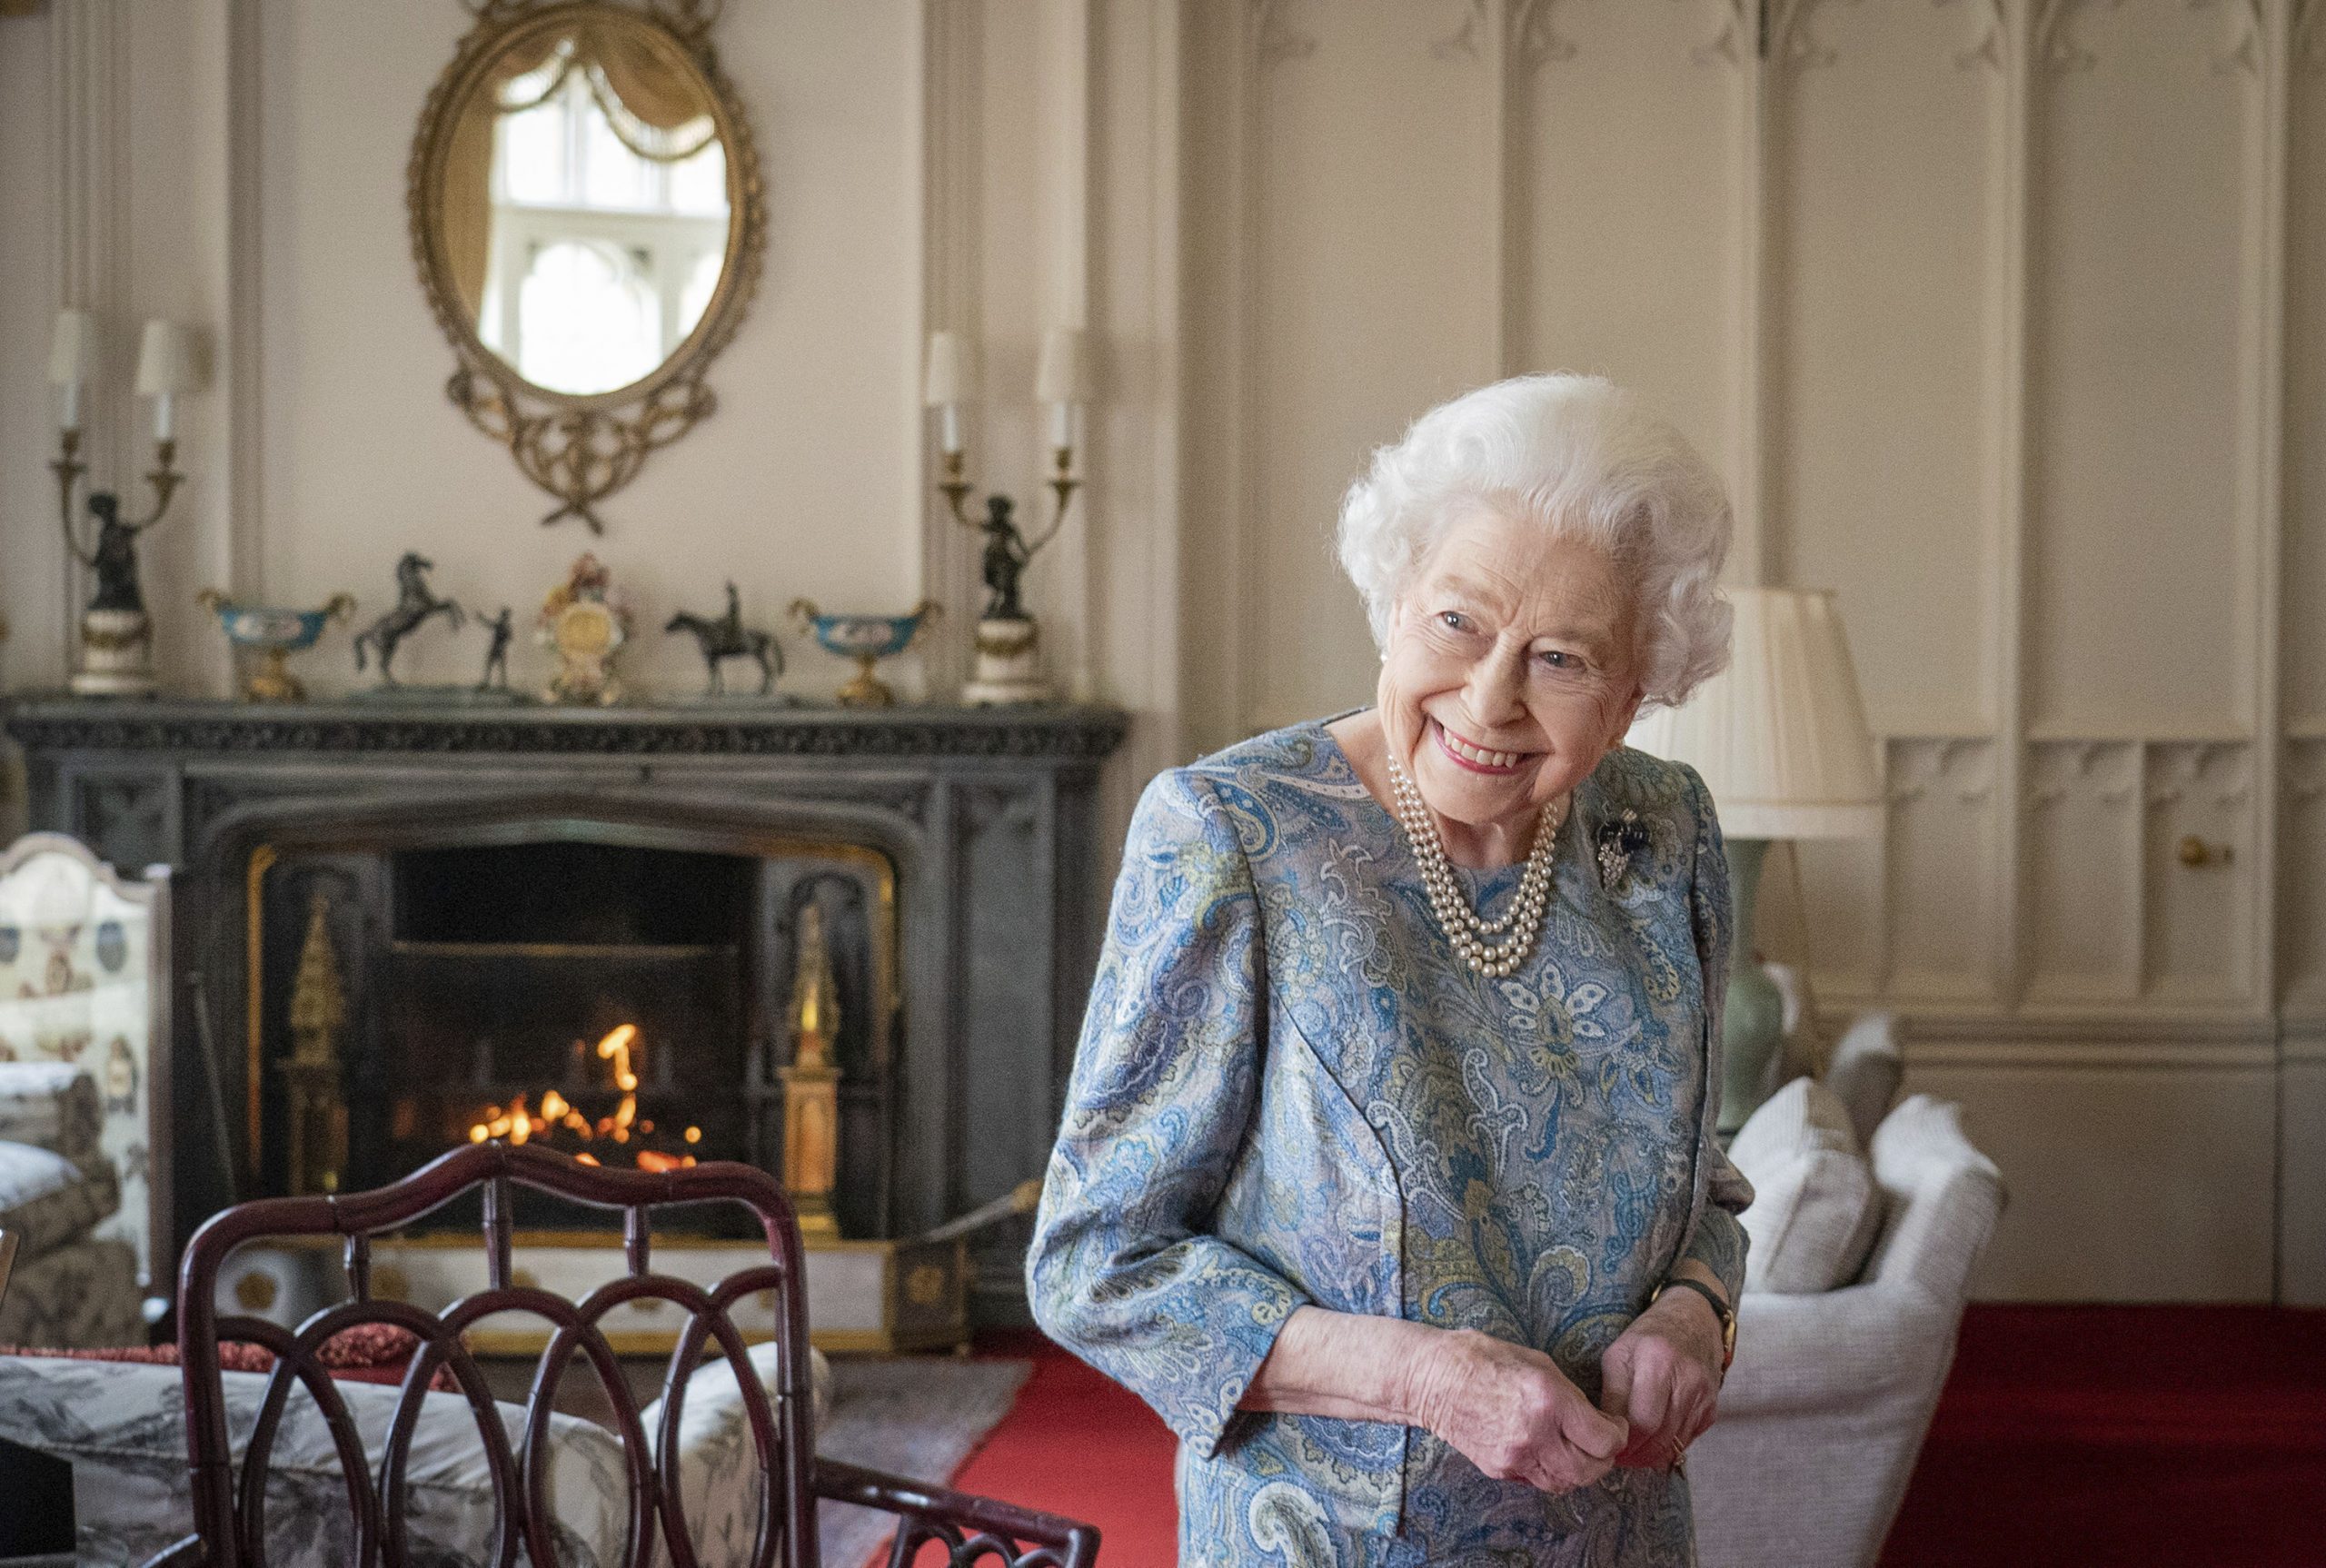 Queen Elizabeth II’s platinum jubilee celebrations: All you need to know